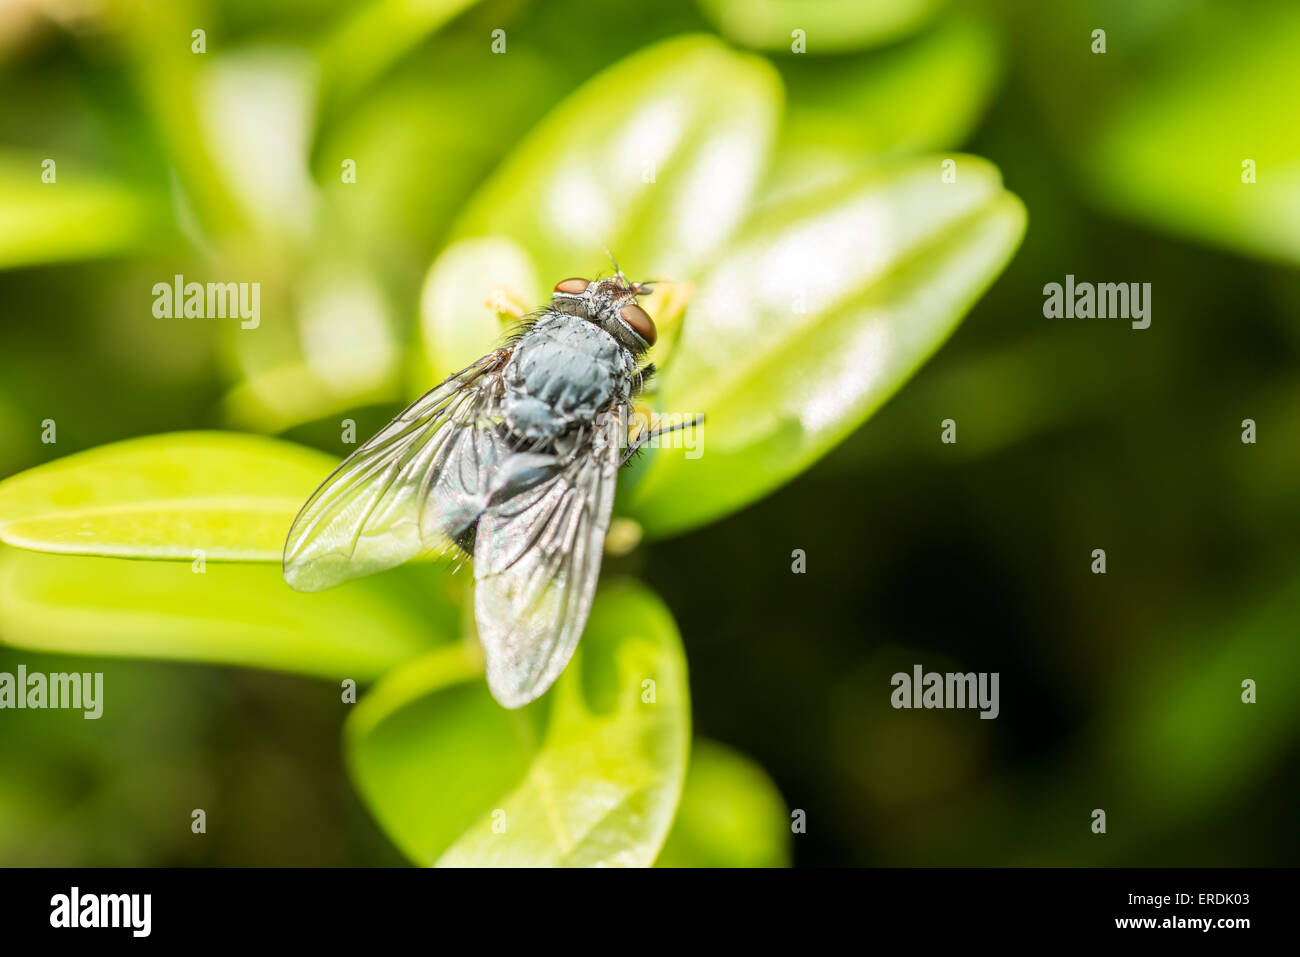 Common Housefly Macro On Green Leaves Background Stock Photo